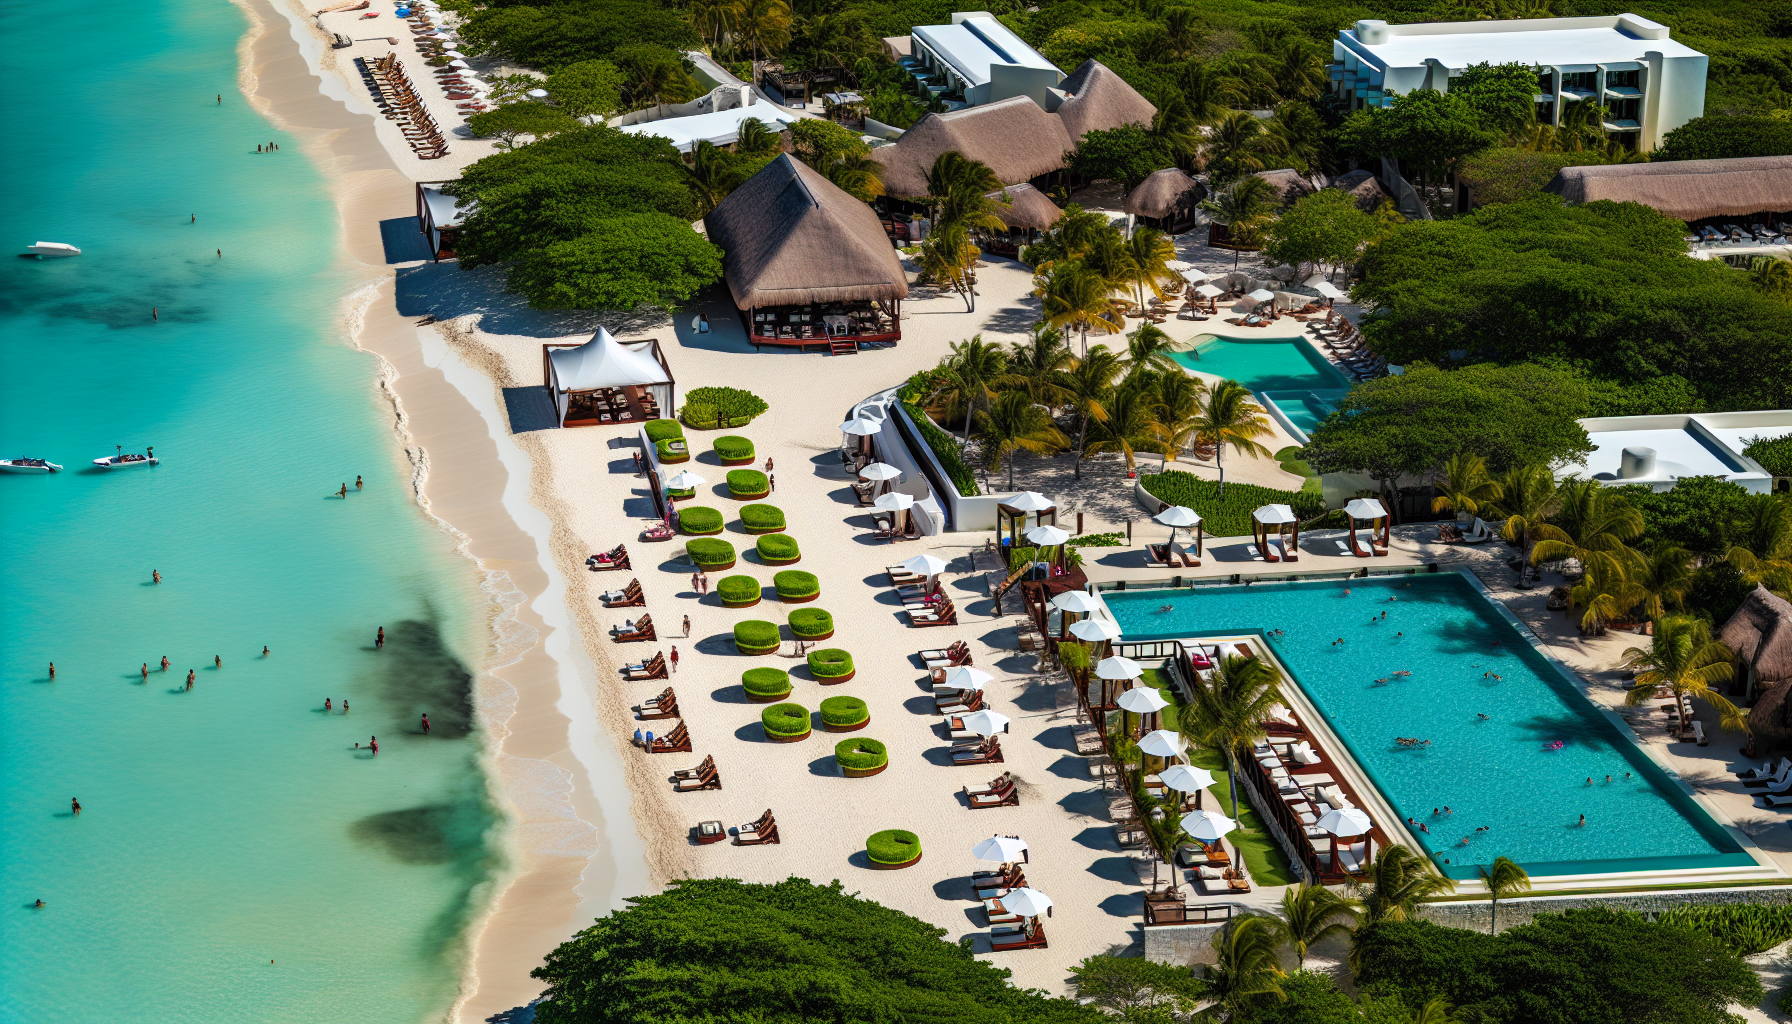 Aerial view of Playa Largo resort with a private beach and outdoor pool